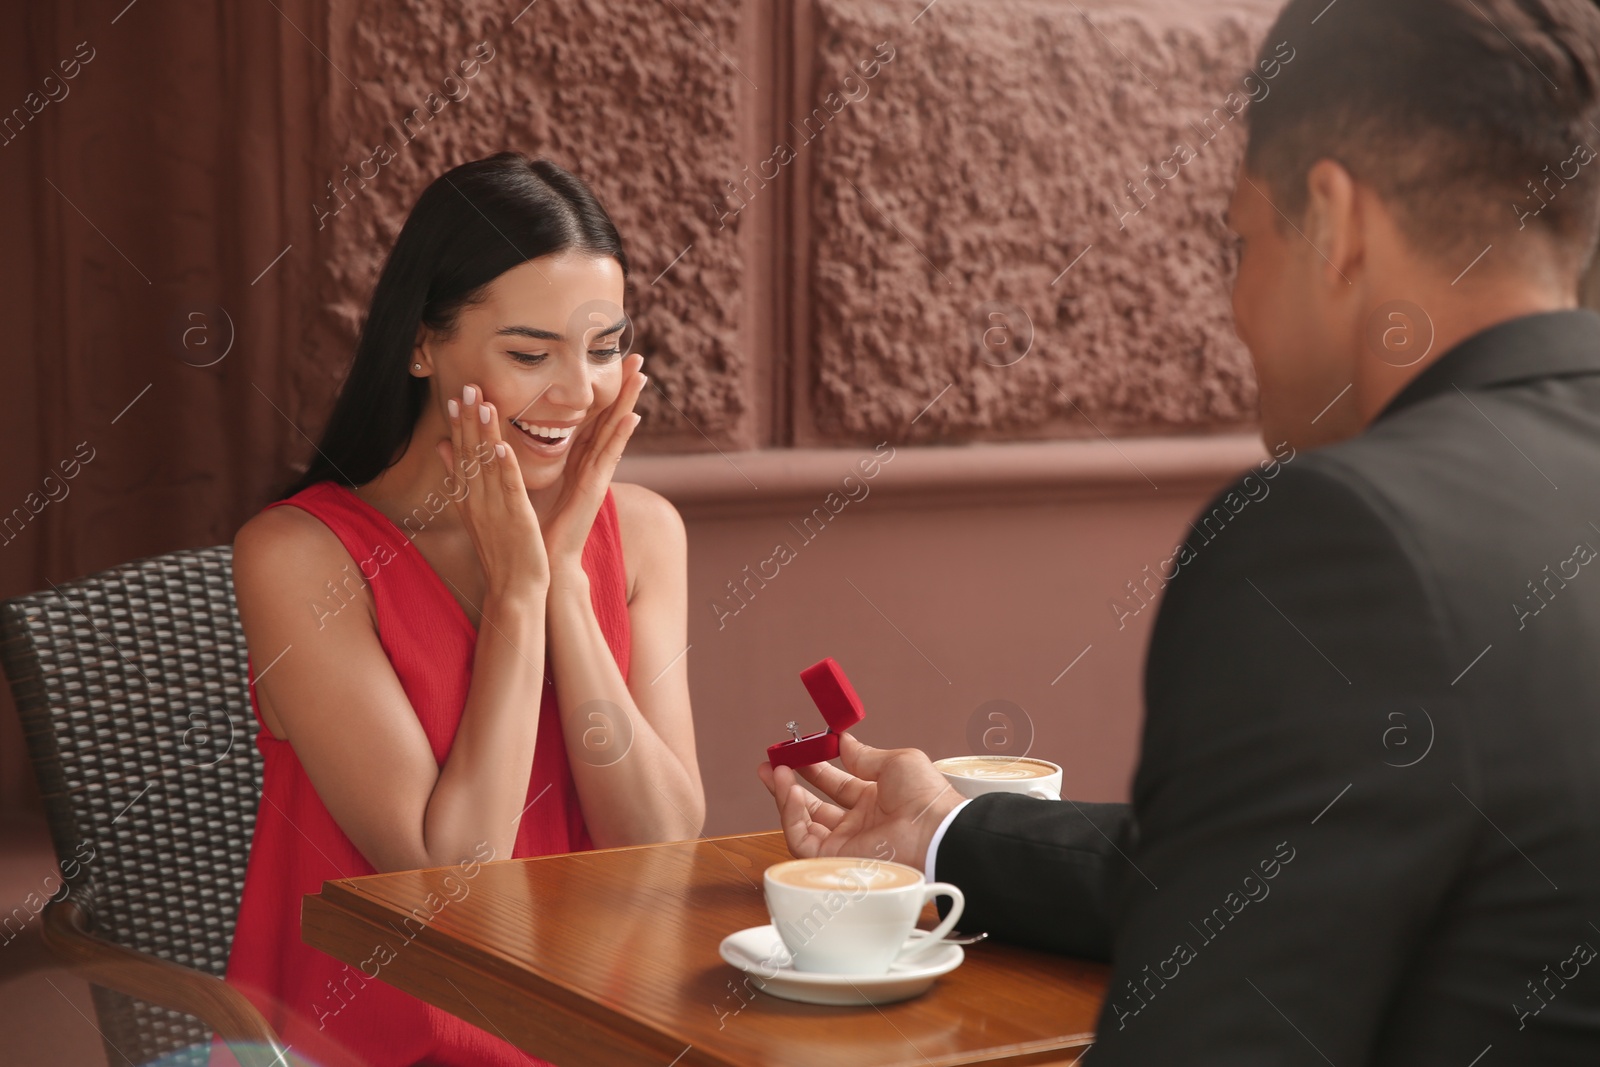 Photo of Man with engagement ring making proposal to his girlfriend in outdoor cafe